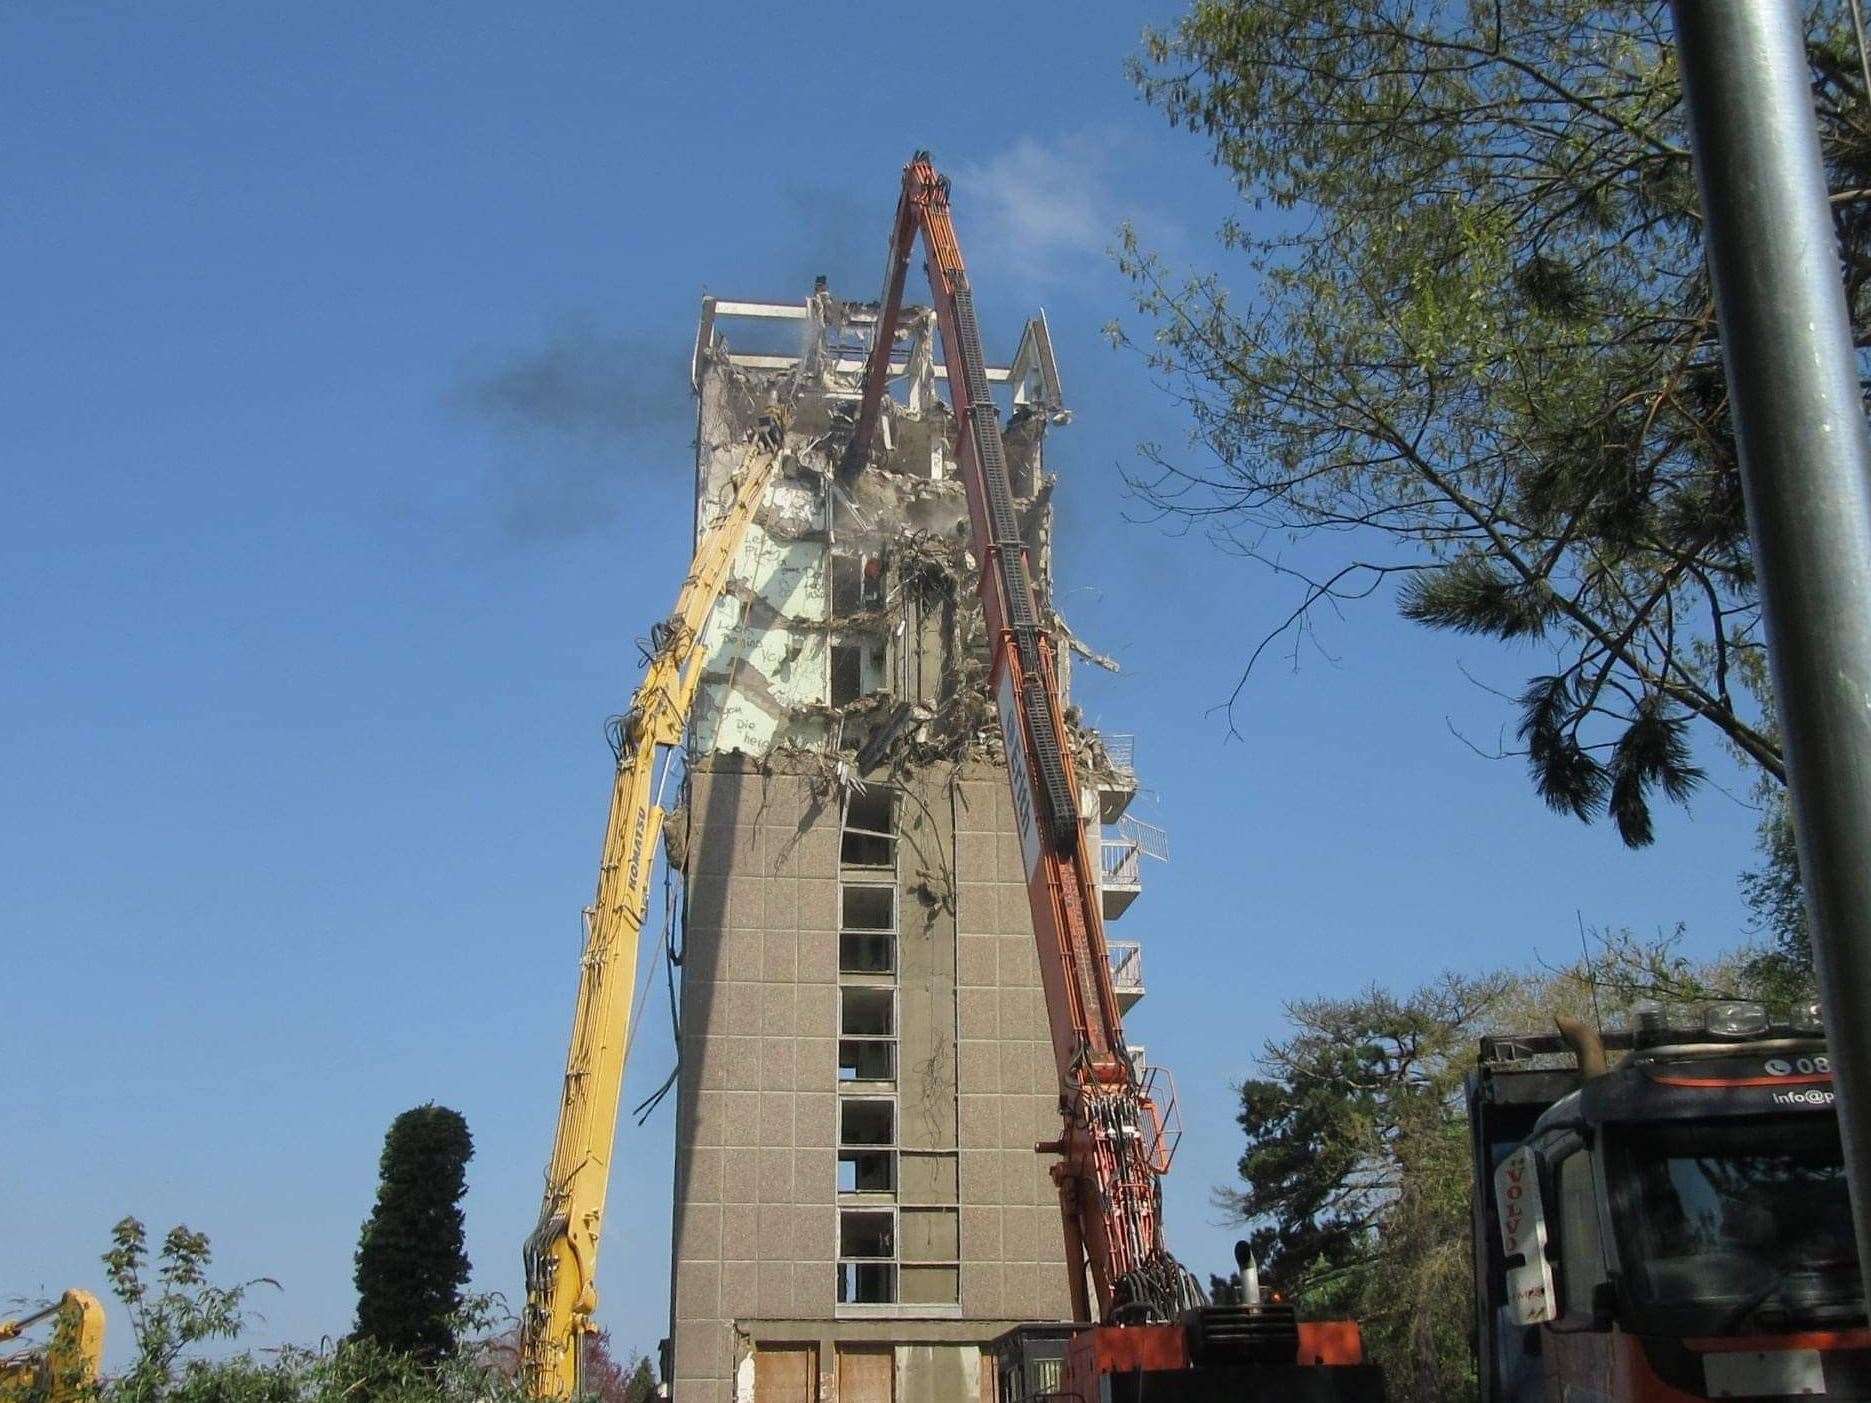 The library tower being demolished in 2022